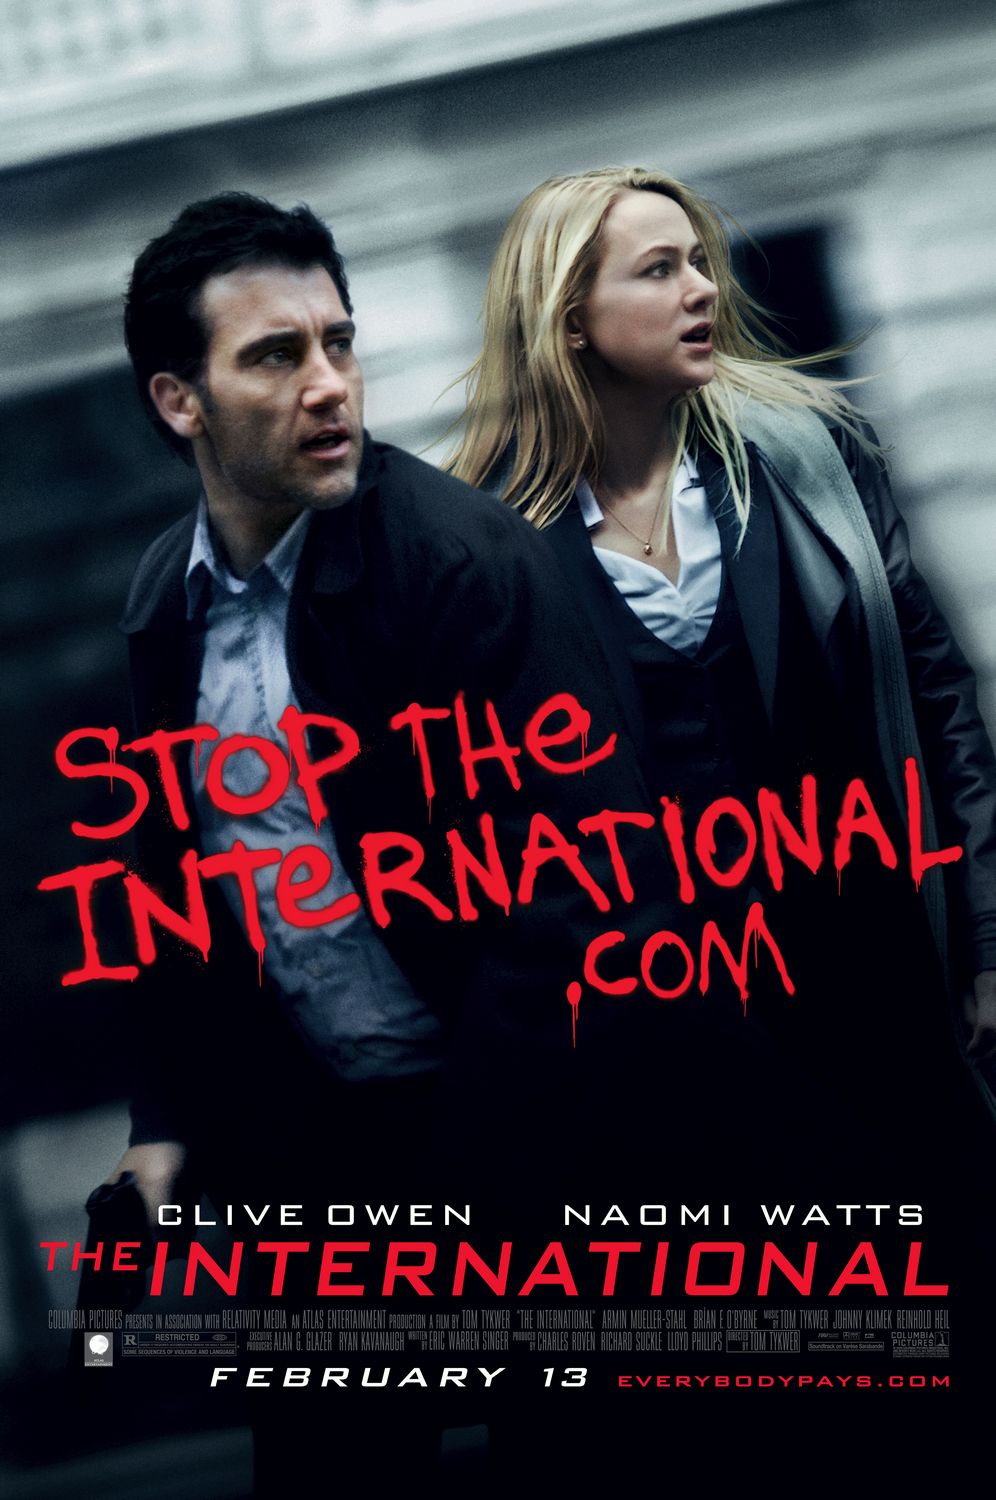 Extra Large Movie Poster Image for The International (#4 of 4)